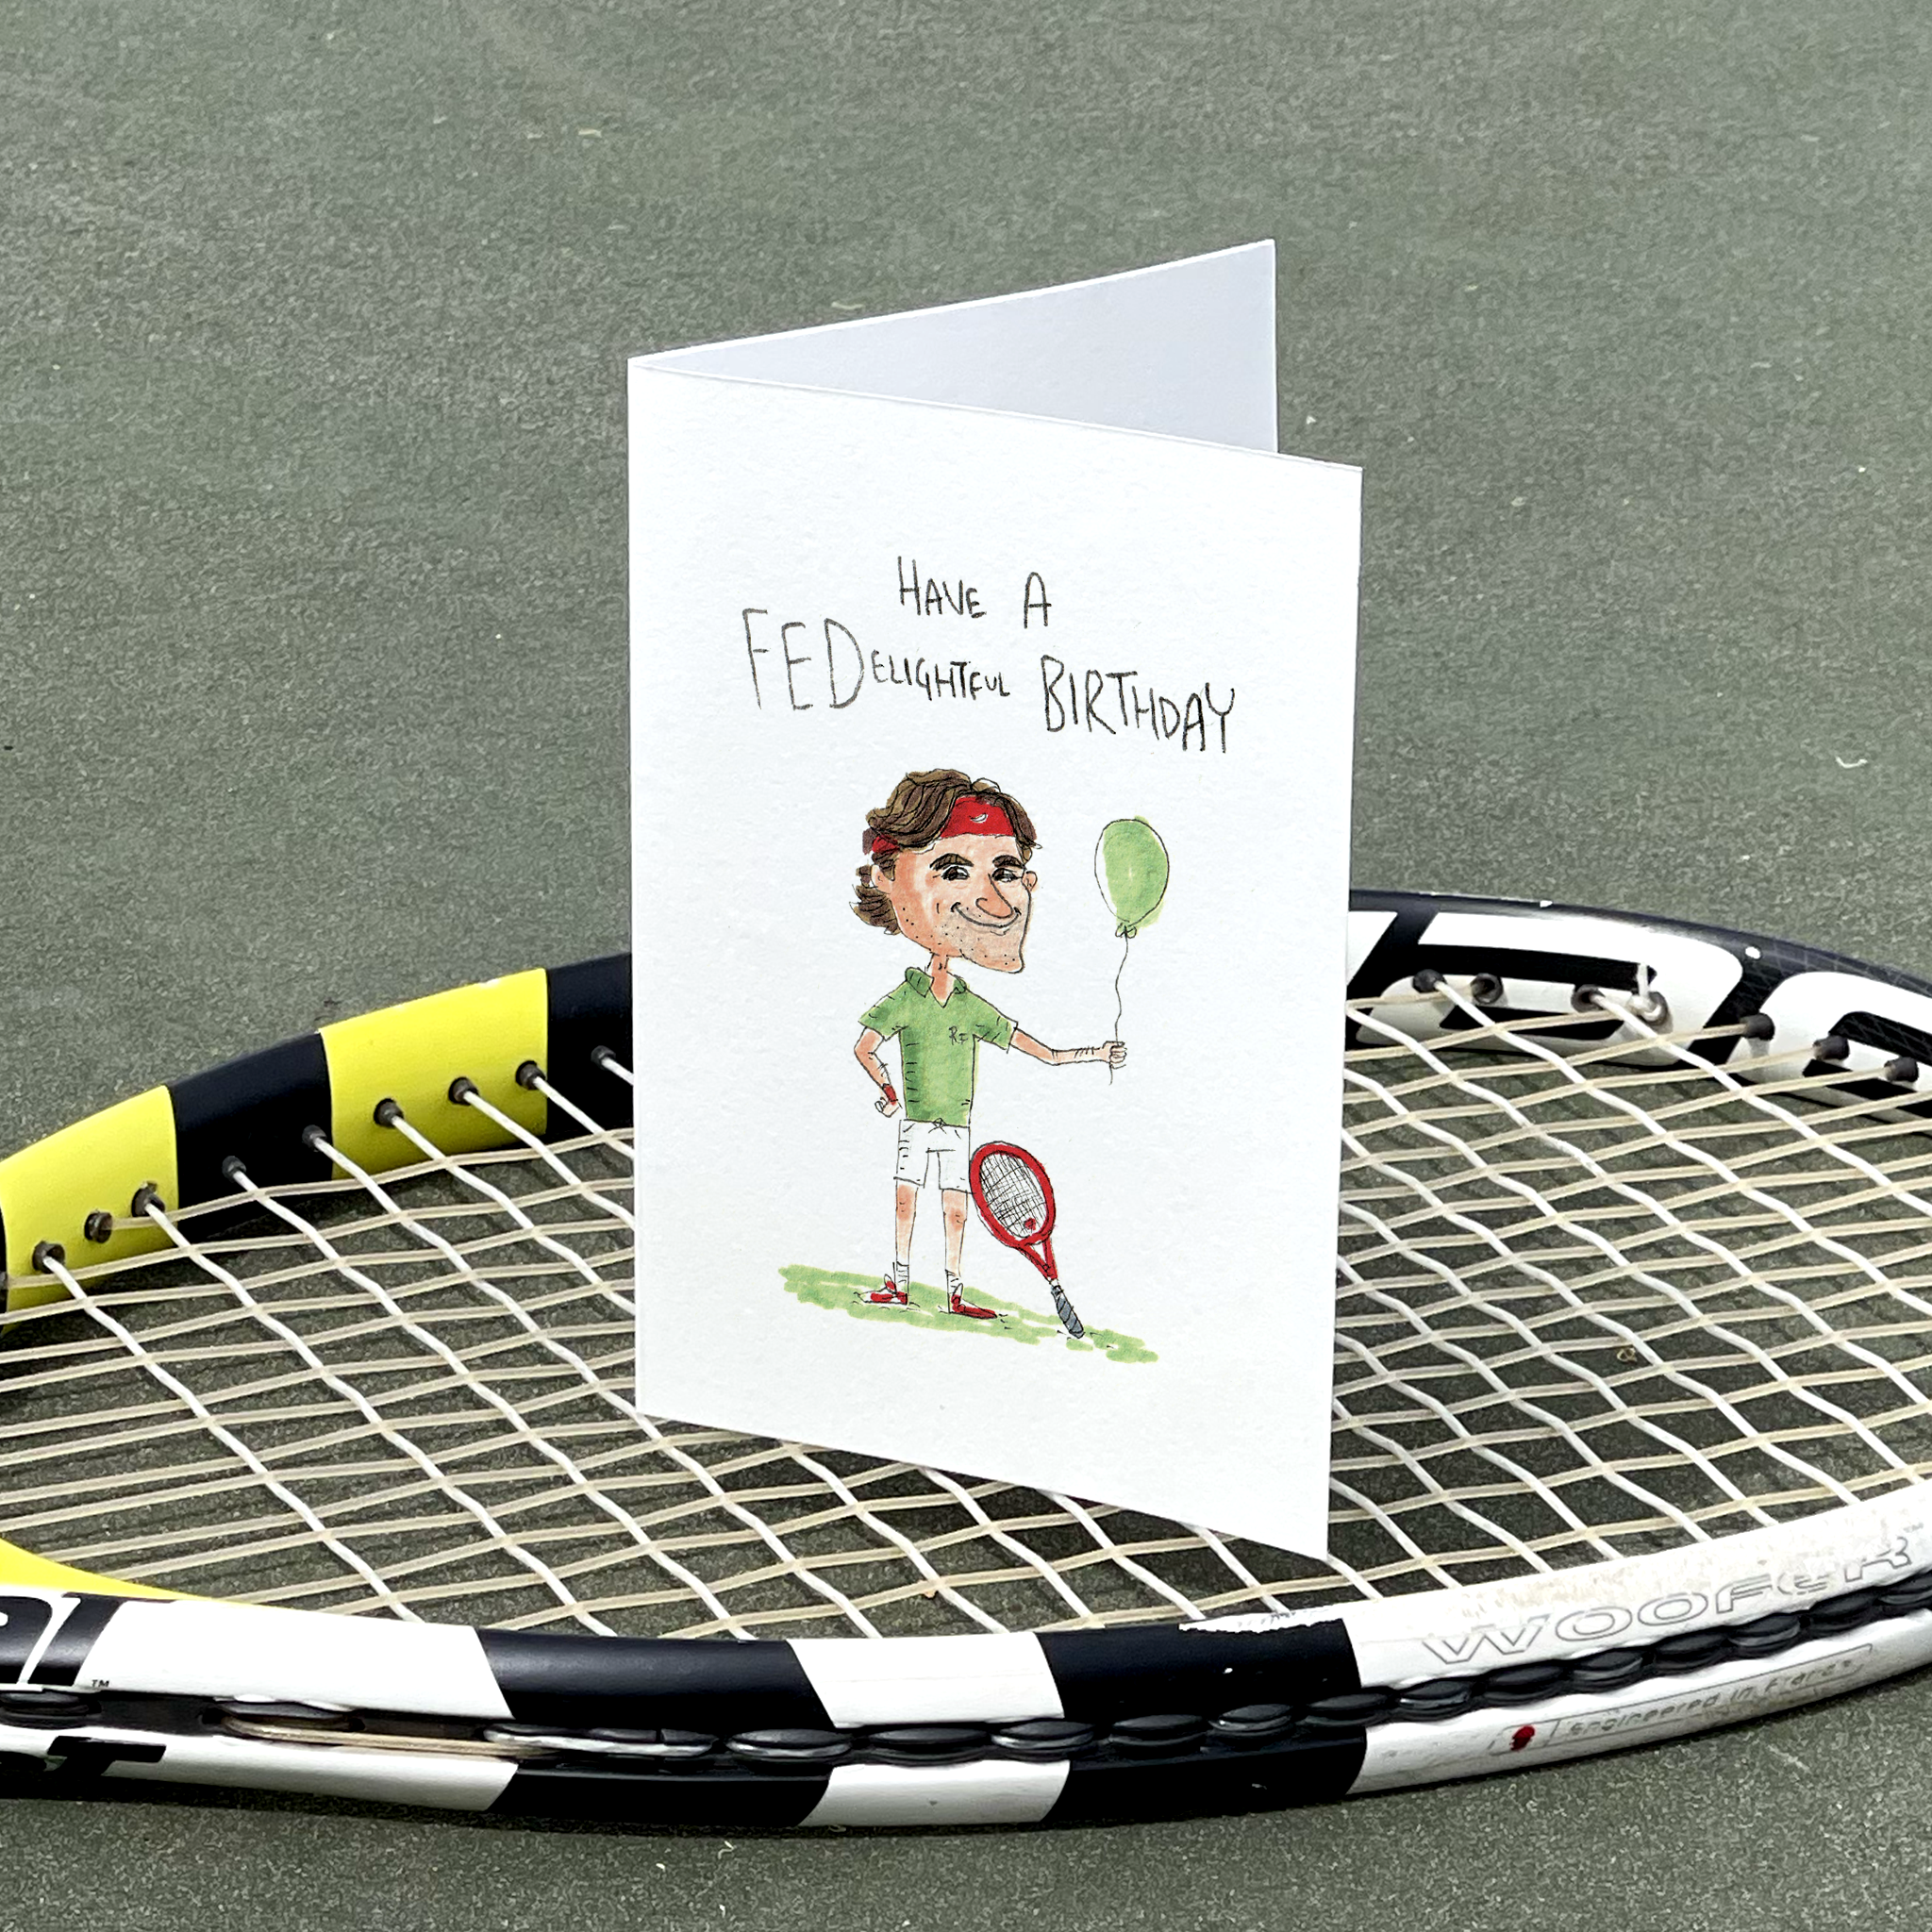 Have A FEDelightful Birthday - TENNIS FANS collection